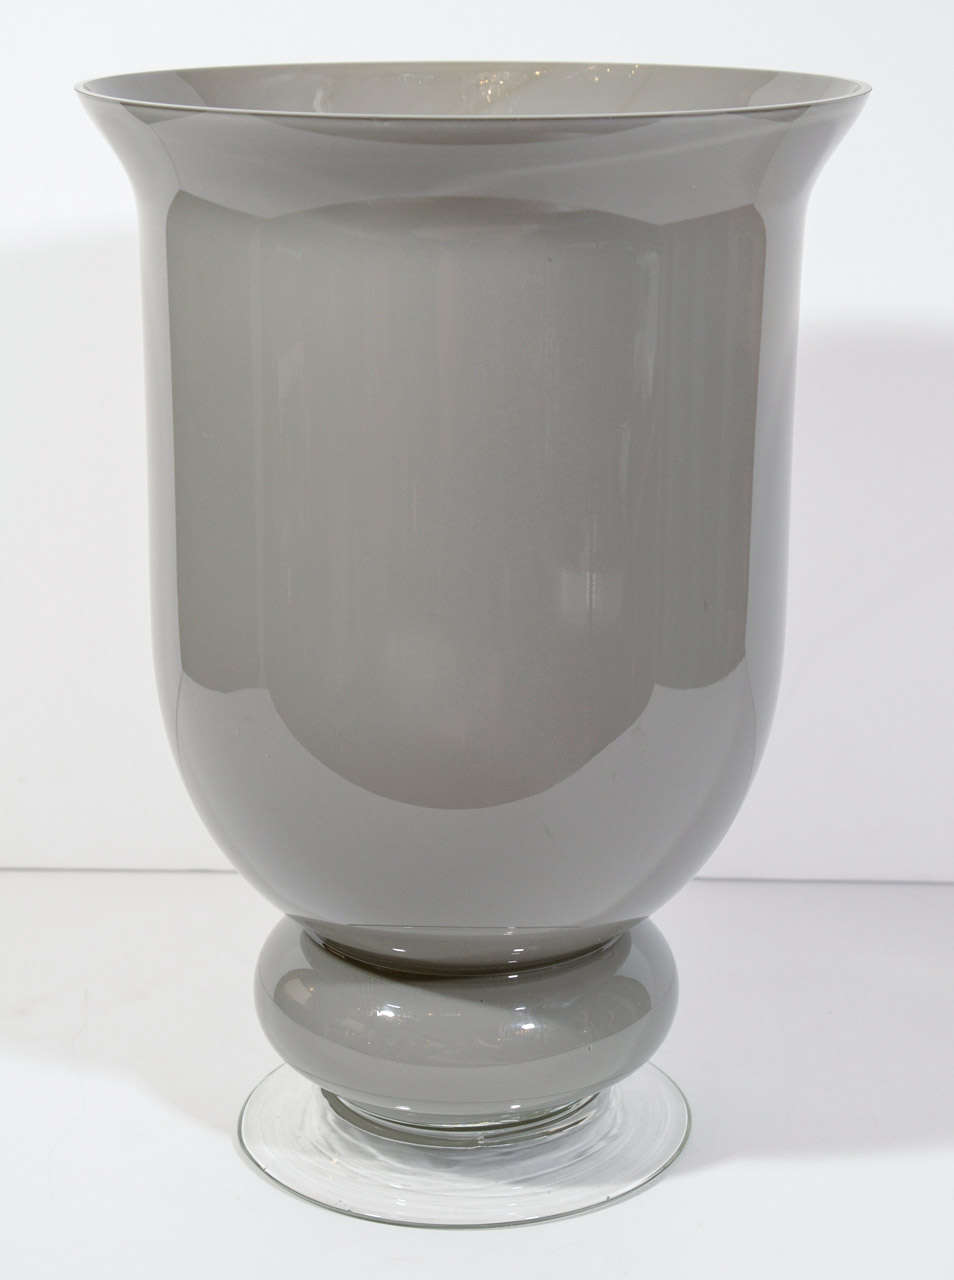 Gorgeous pair of hand blown Murano glass urn vases. The urns have a medium smoked grey cast and have bulbous lower details with clear Murano glass footed bases. Great option as a pair of centerpieces.